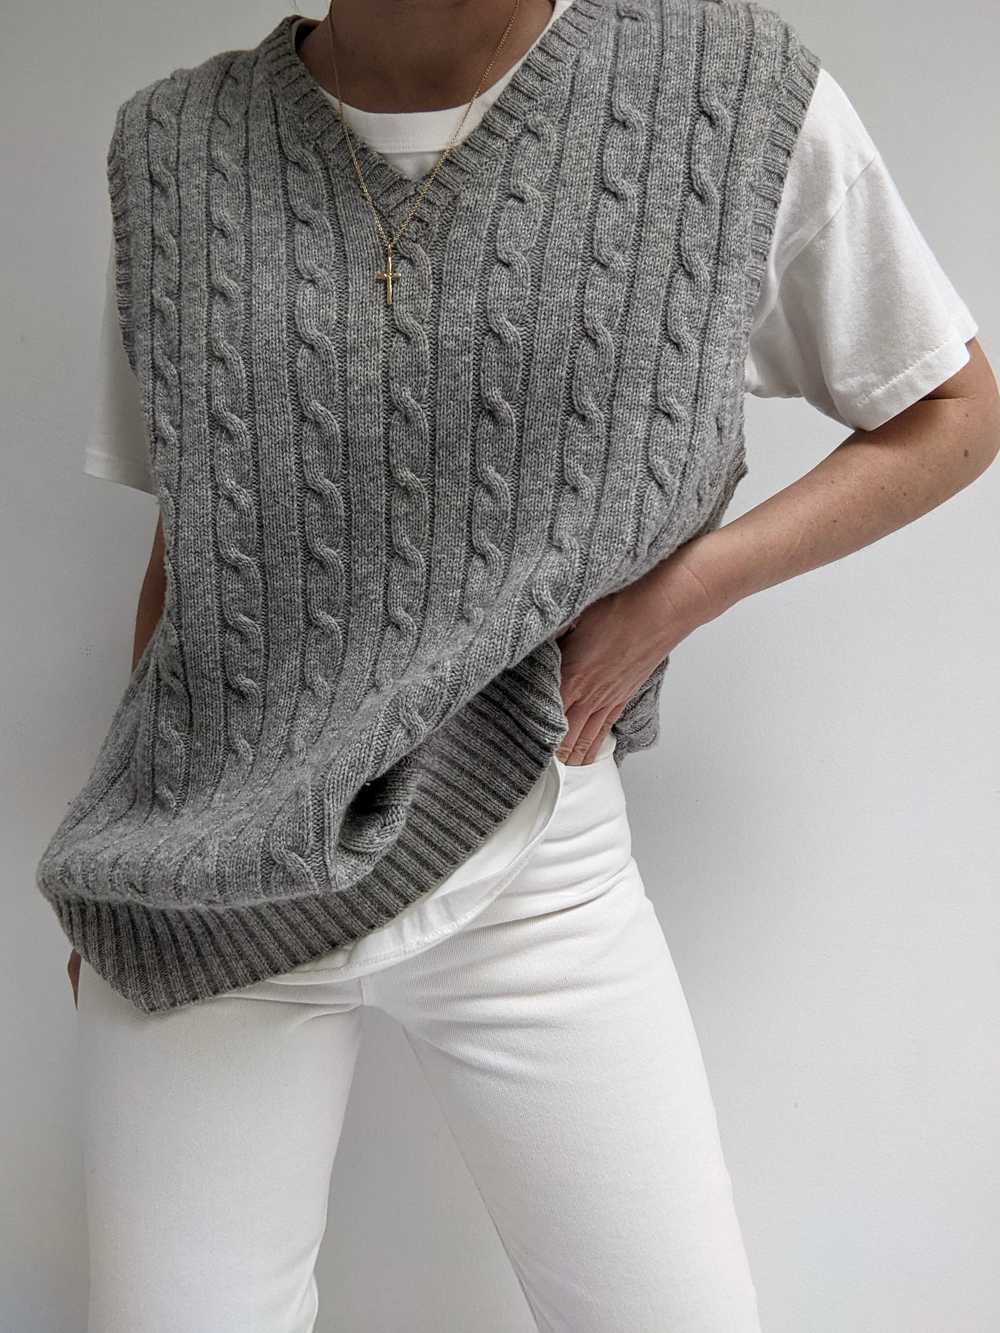 Vintage Grey Cable Knit Lambswool Sweater Vest - image 2